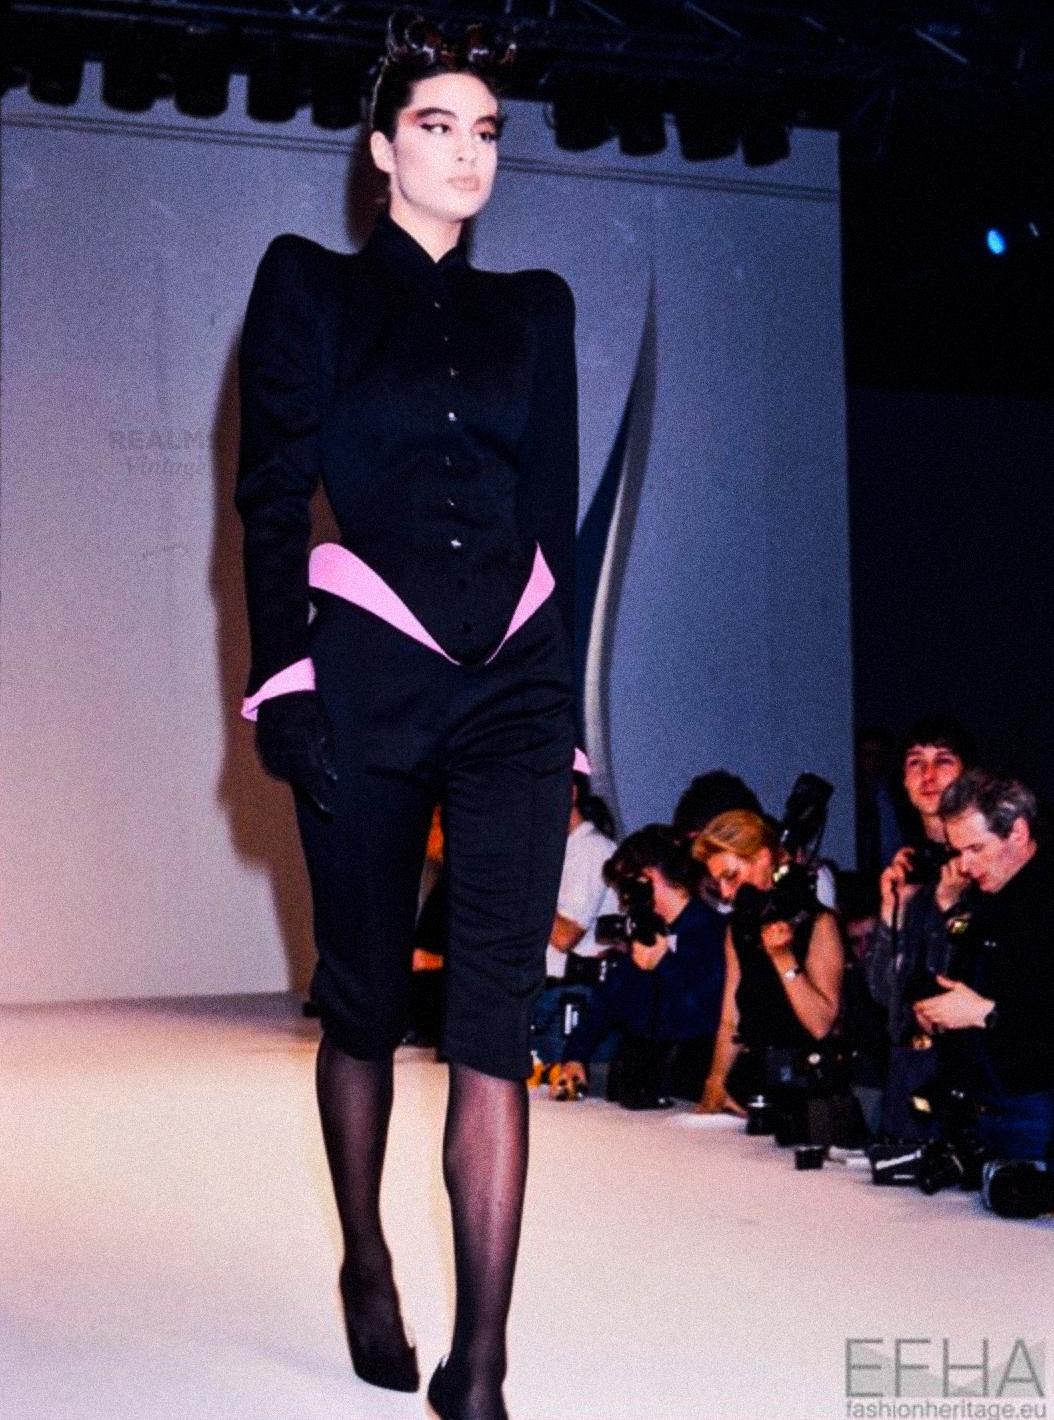 Museum worthy piece of Fashion History

The stunning iconic Thierry Mugler creation from the legendary Les Infernales (SHE DEVILS) Collection FW 1988/1989. Extremely rare documented Runway piece.
Powerful sculptural shape.
Dramatic avant-garde